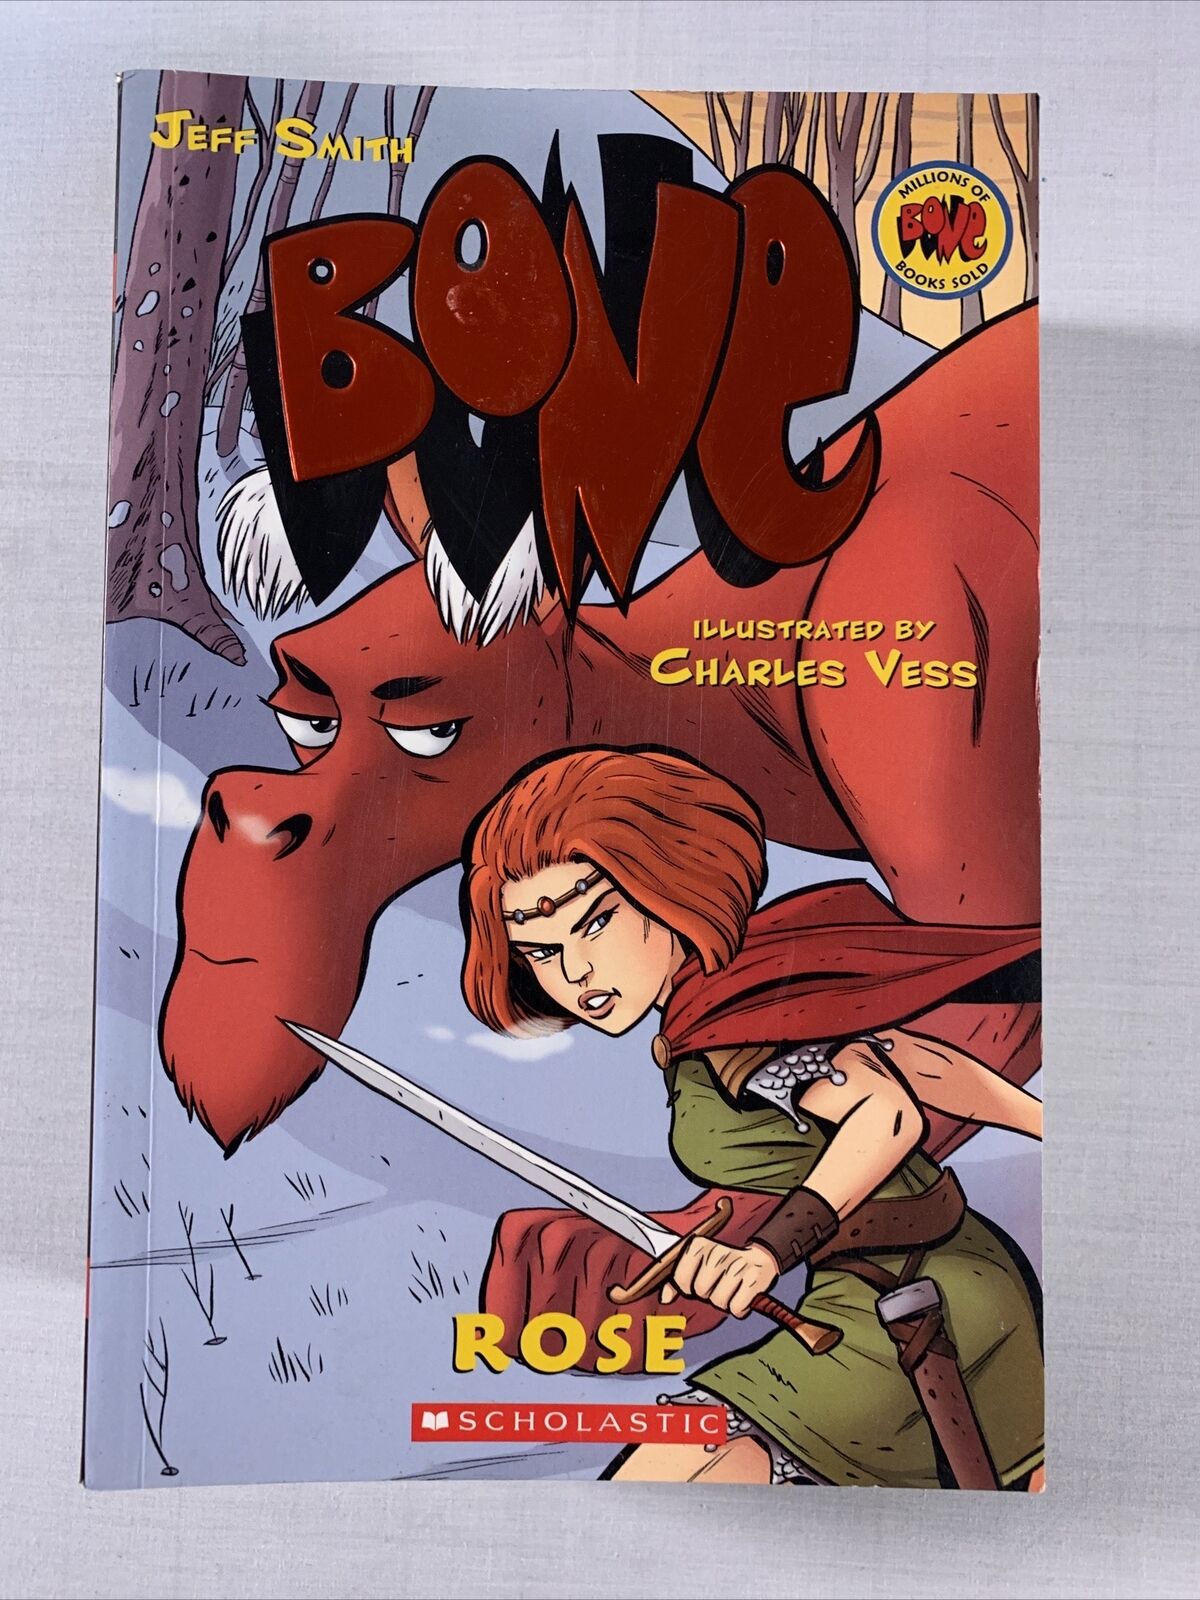 Rose: A Graphic Novel By Jeff Smith (BONE Prequel) + Volumes 2, 4, 6, 7, 8 And 9